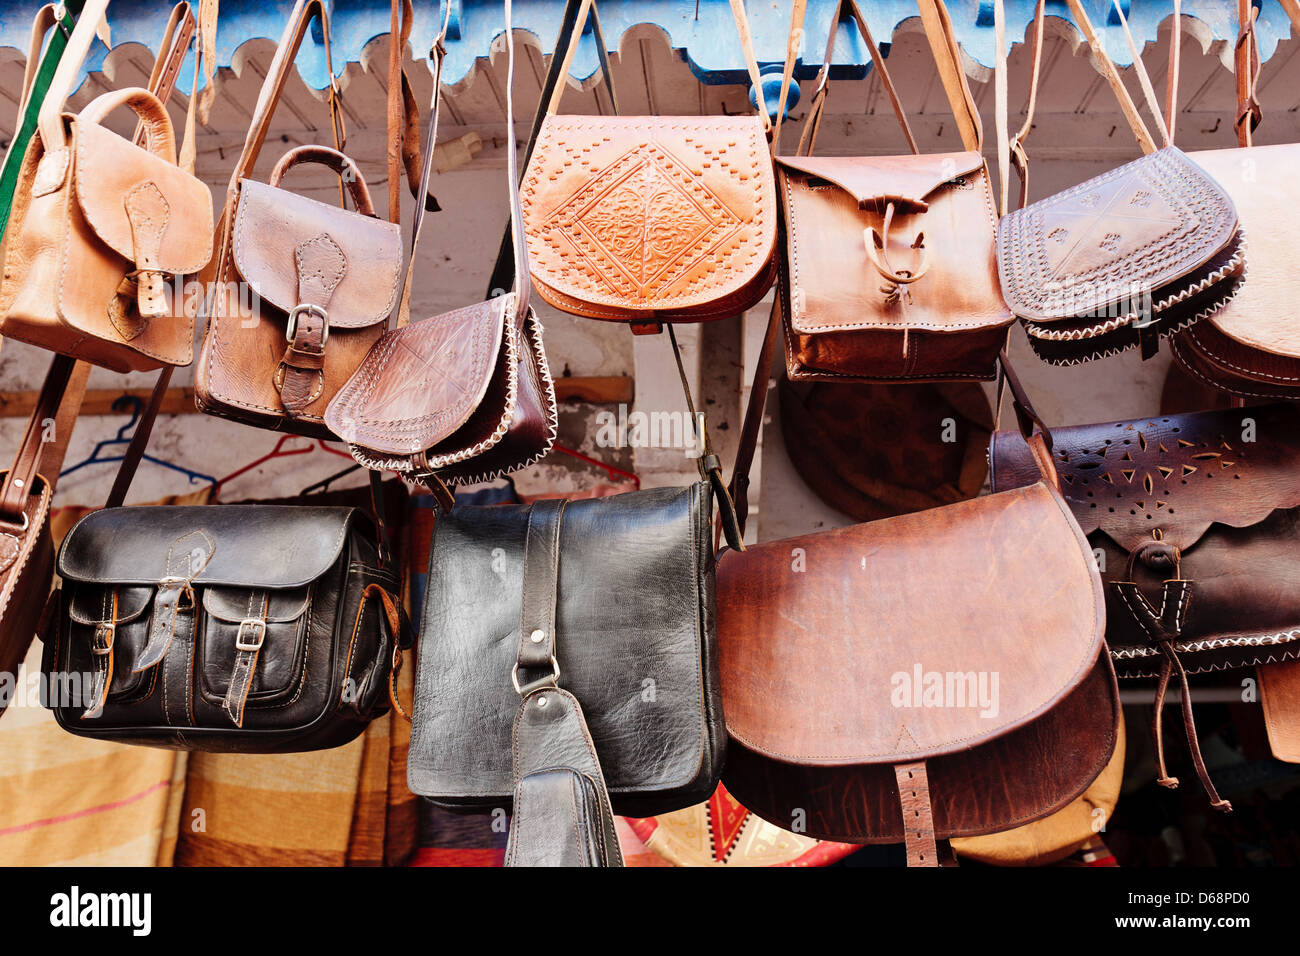 Vendor selling bags in a street market – Stock Editorial Photo ©  imagedb_seller #32949747